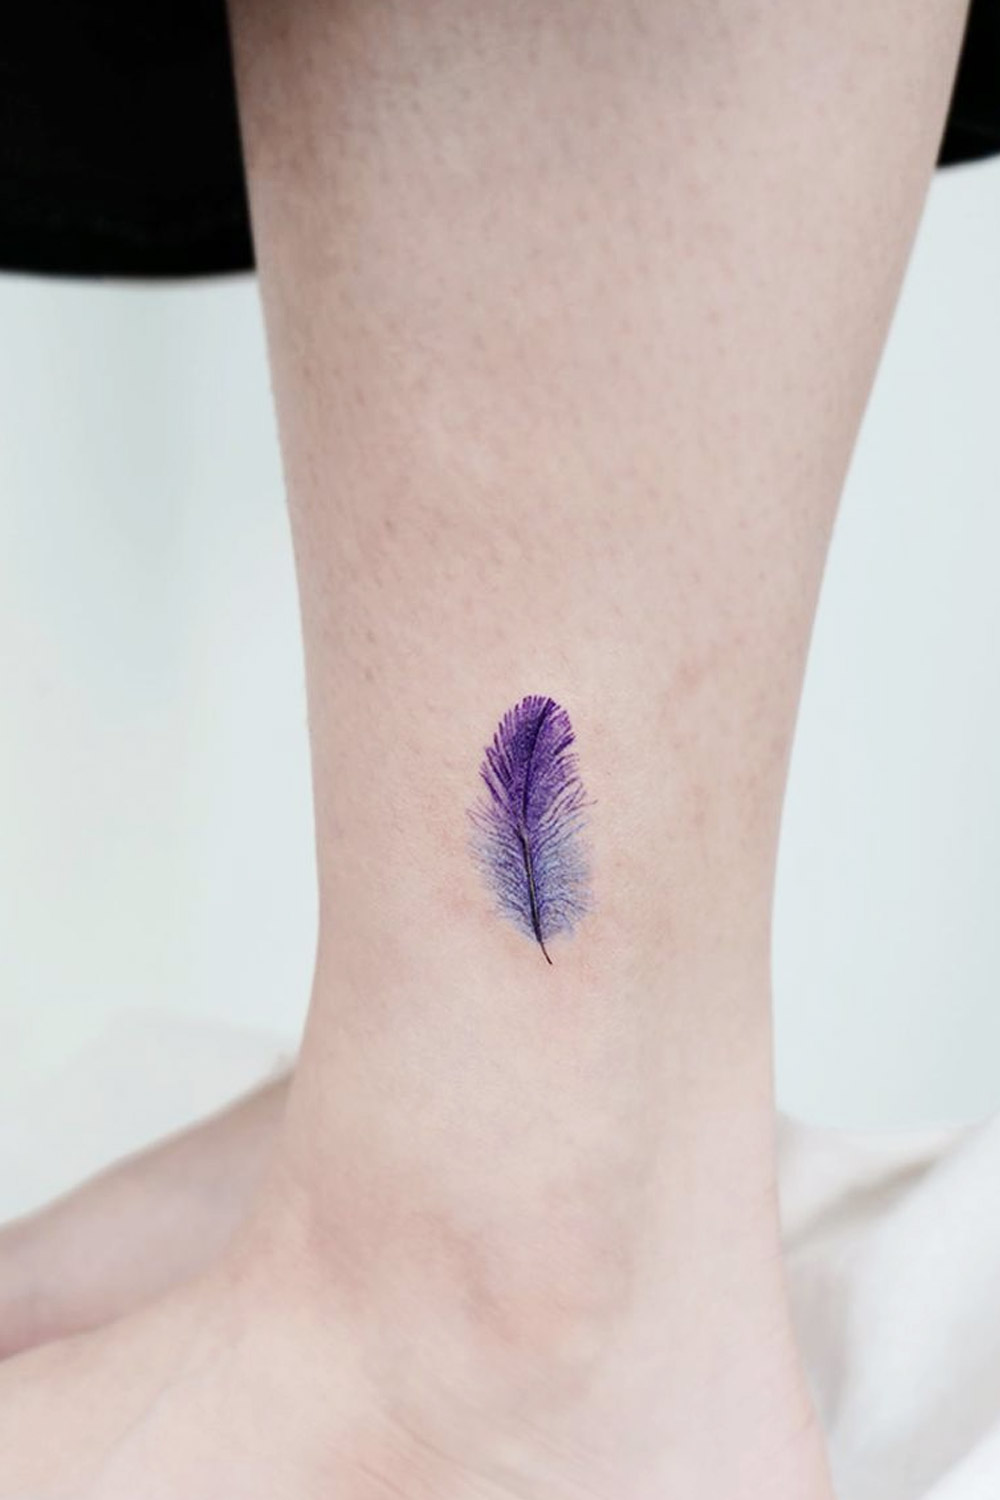 70 Adorable Feather Tattoo Ideas for Women